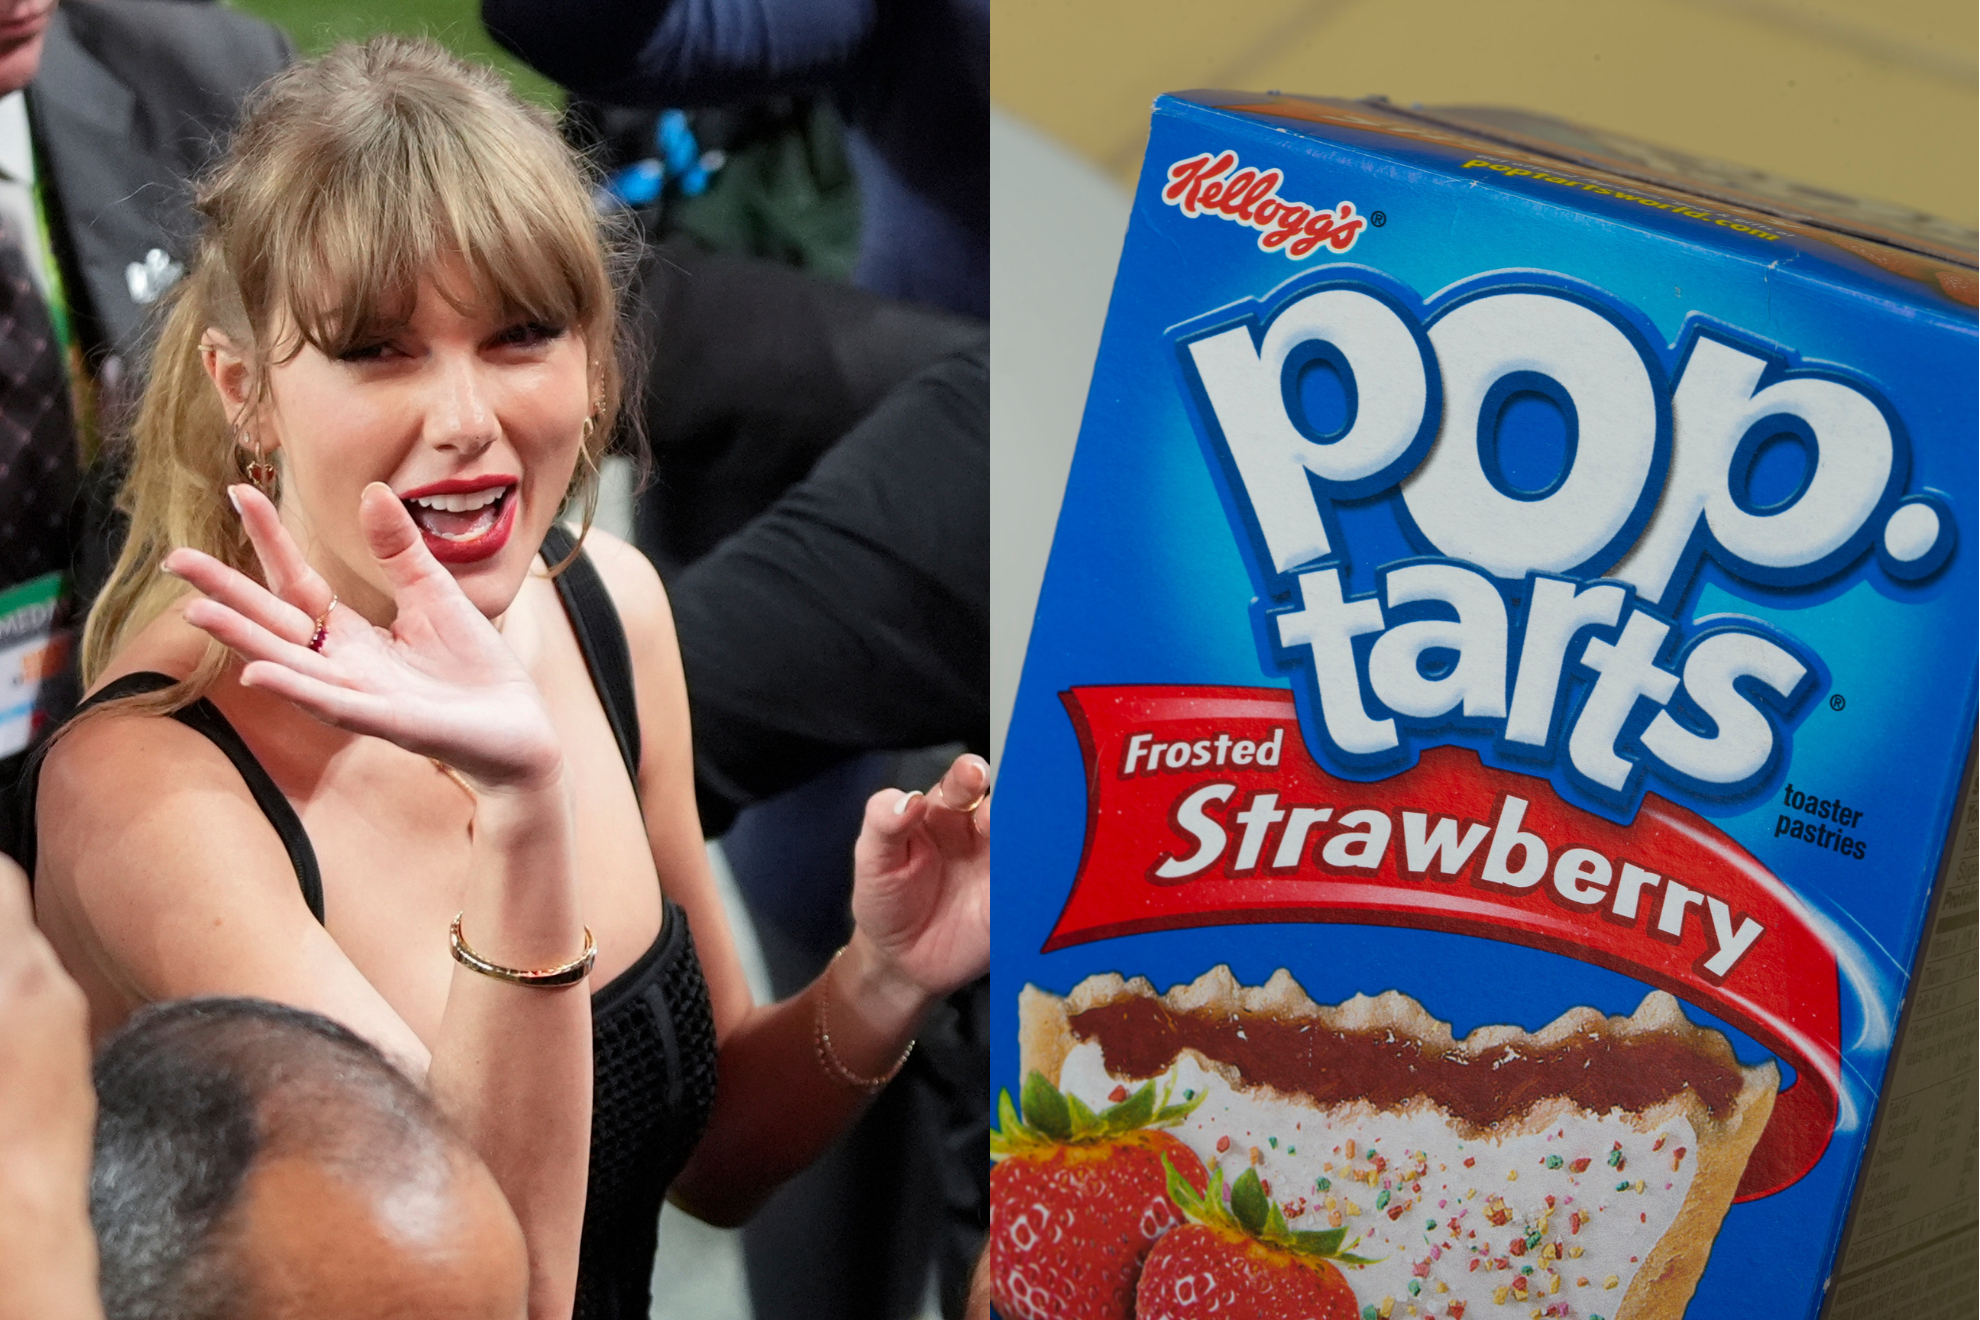 Swift endeared herself to the Chiefs players by making Pop-Tarts.